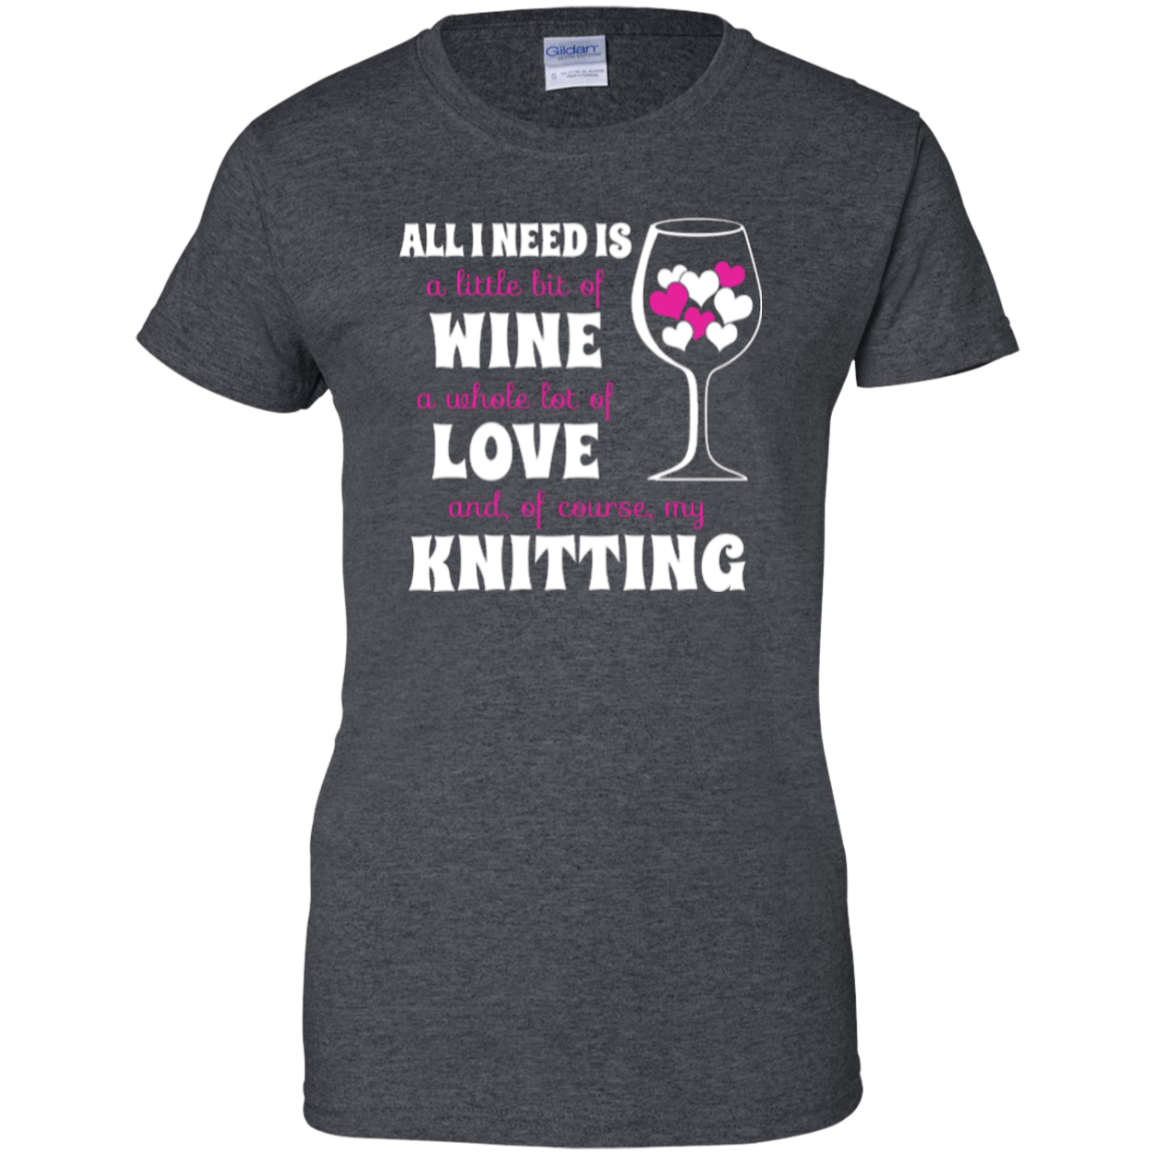 All I Need is Wine-Love-Knitting Ladies Custom 100% Cotton T-Shirt - Crafter4Life - 5